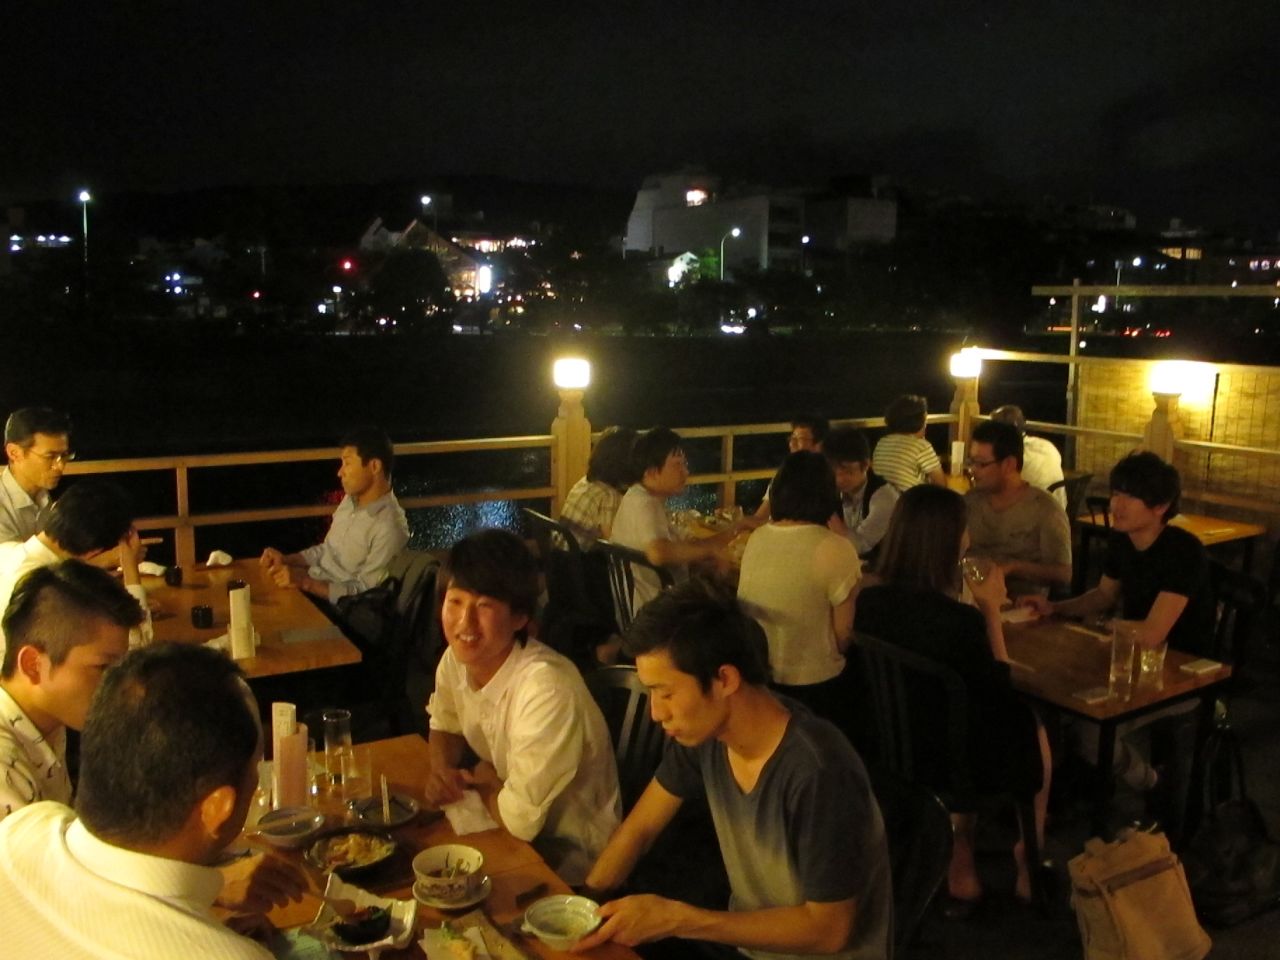 Nighttime balcony (yuka) dining is a summer tradition in Kyoto.